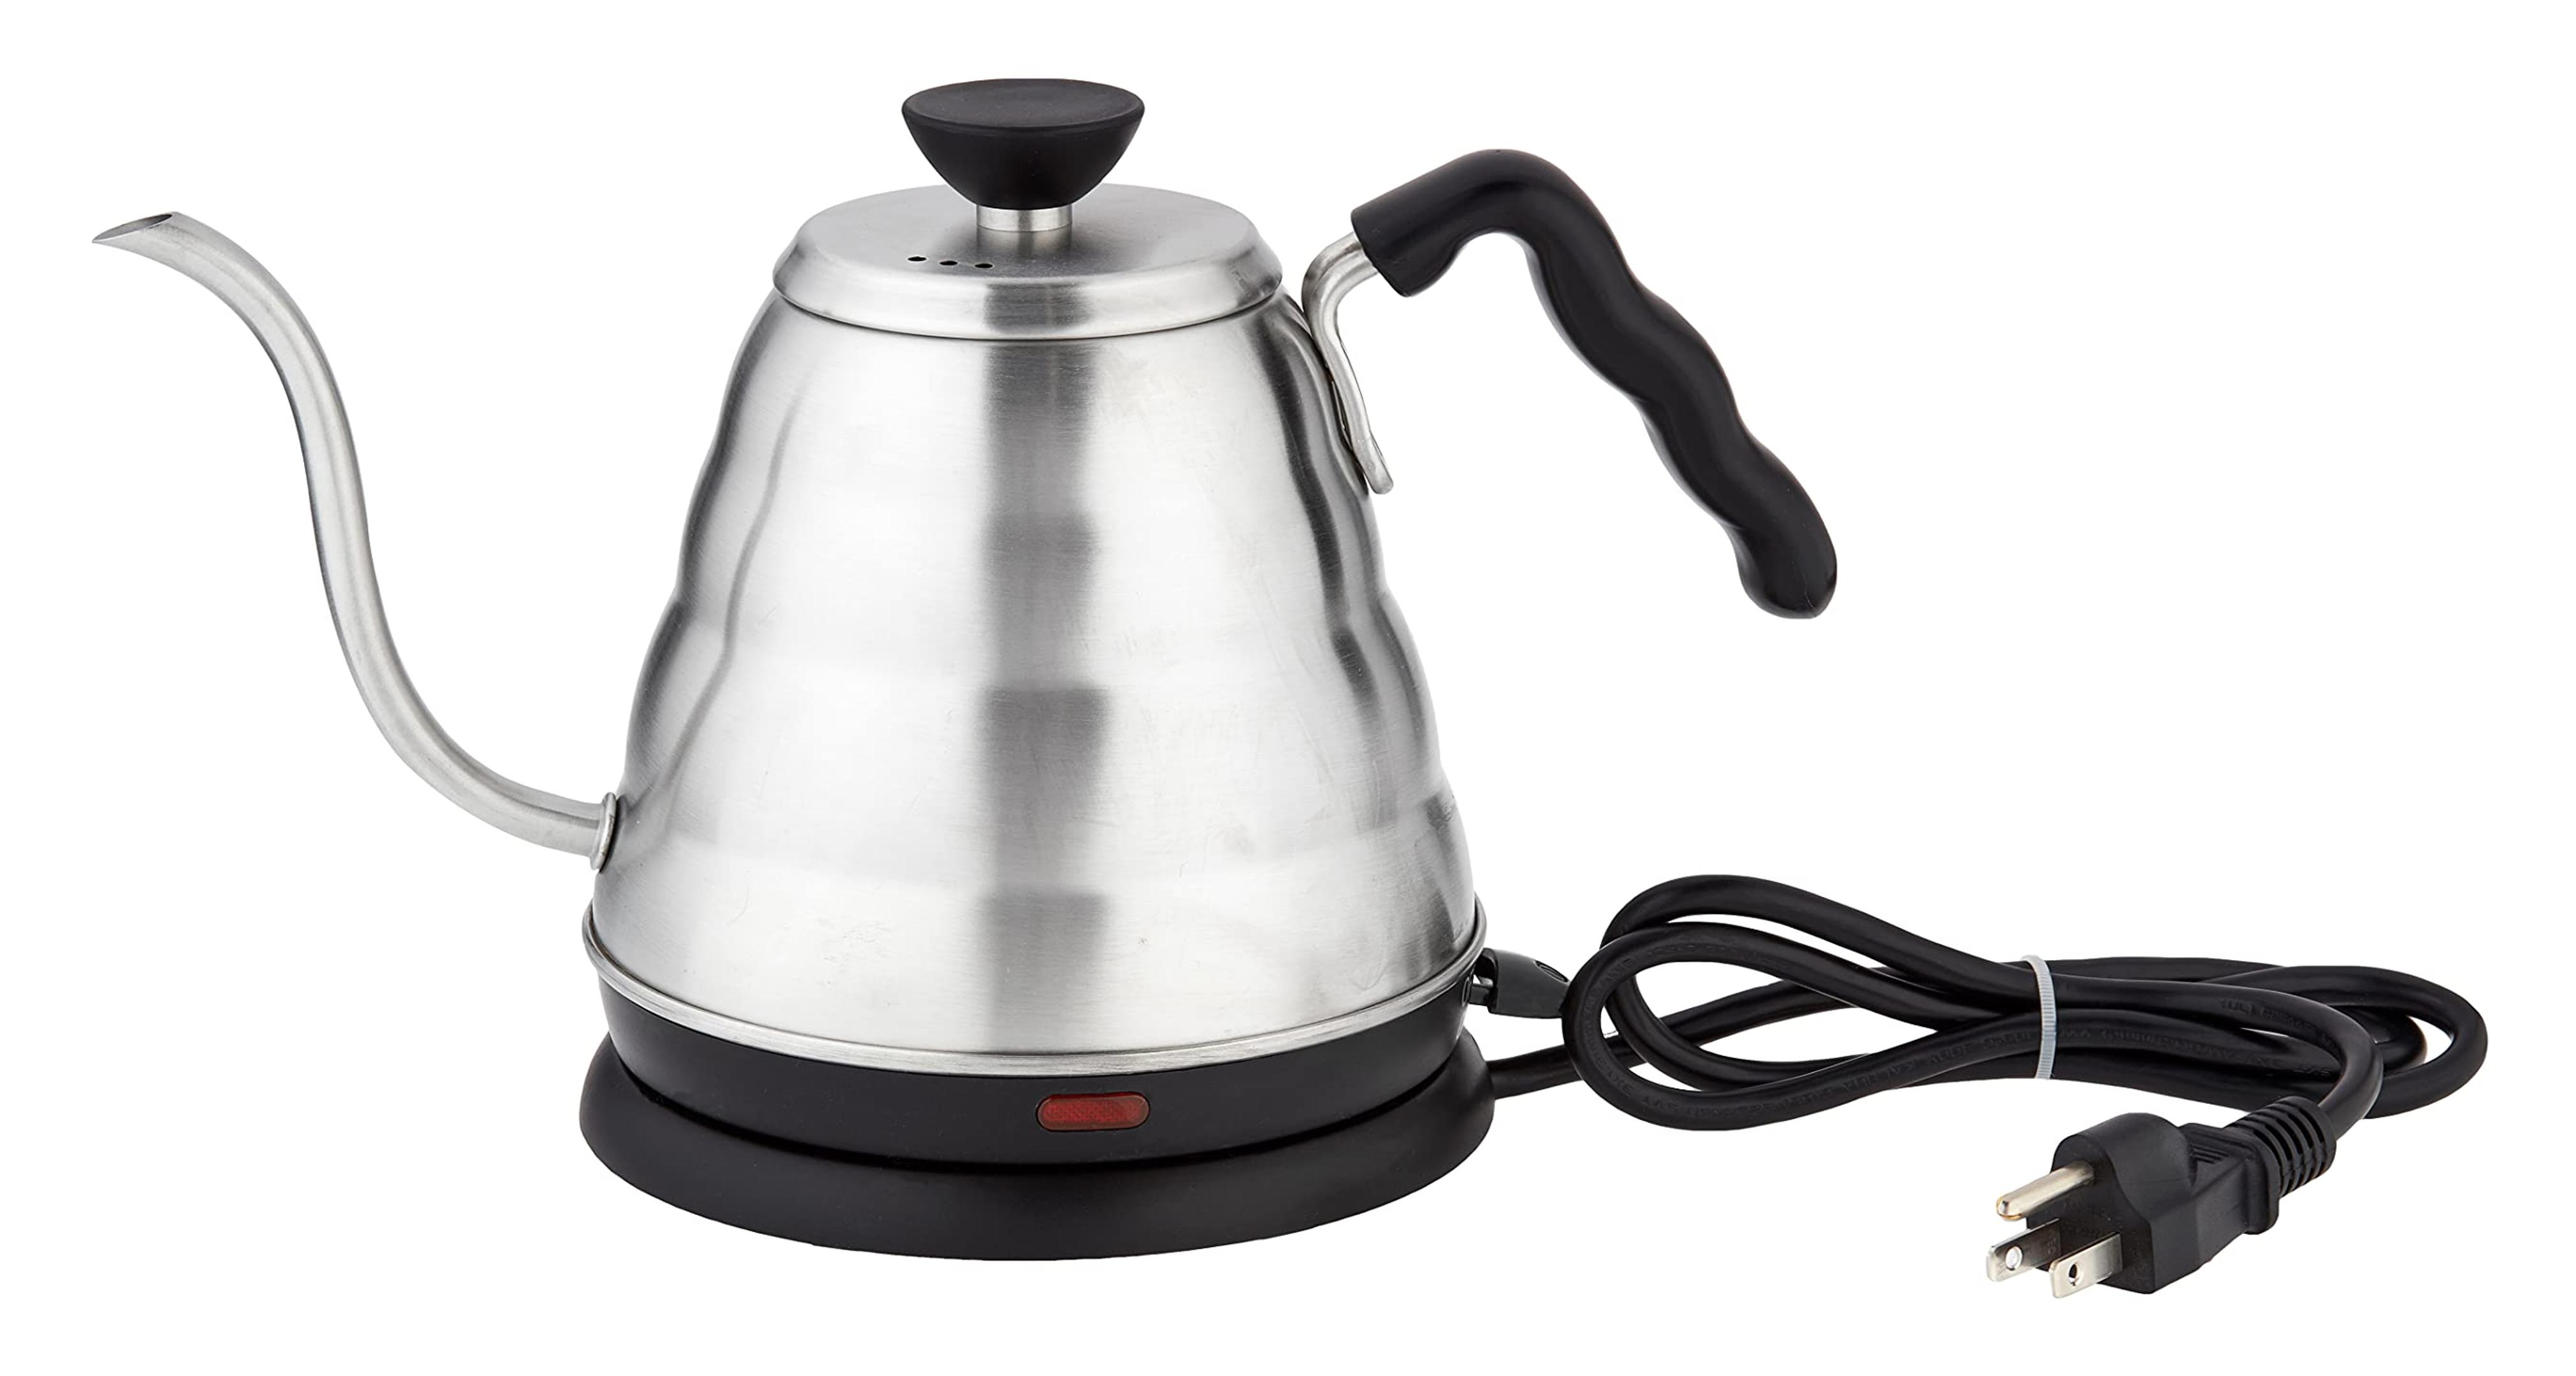 Hario V60 "Buono" Drip Kettle Electric Gooseneck Coffee Kettle 800 mL, Stainless Steel, Silver